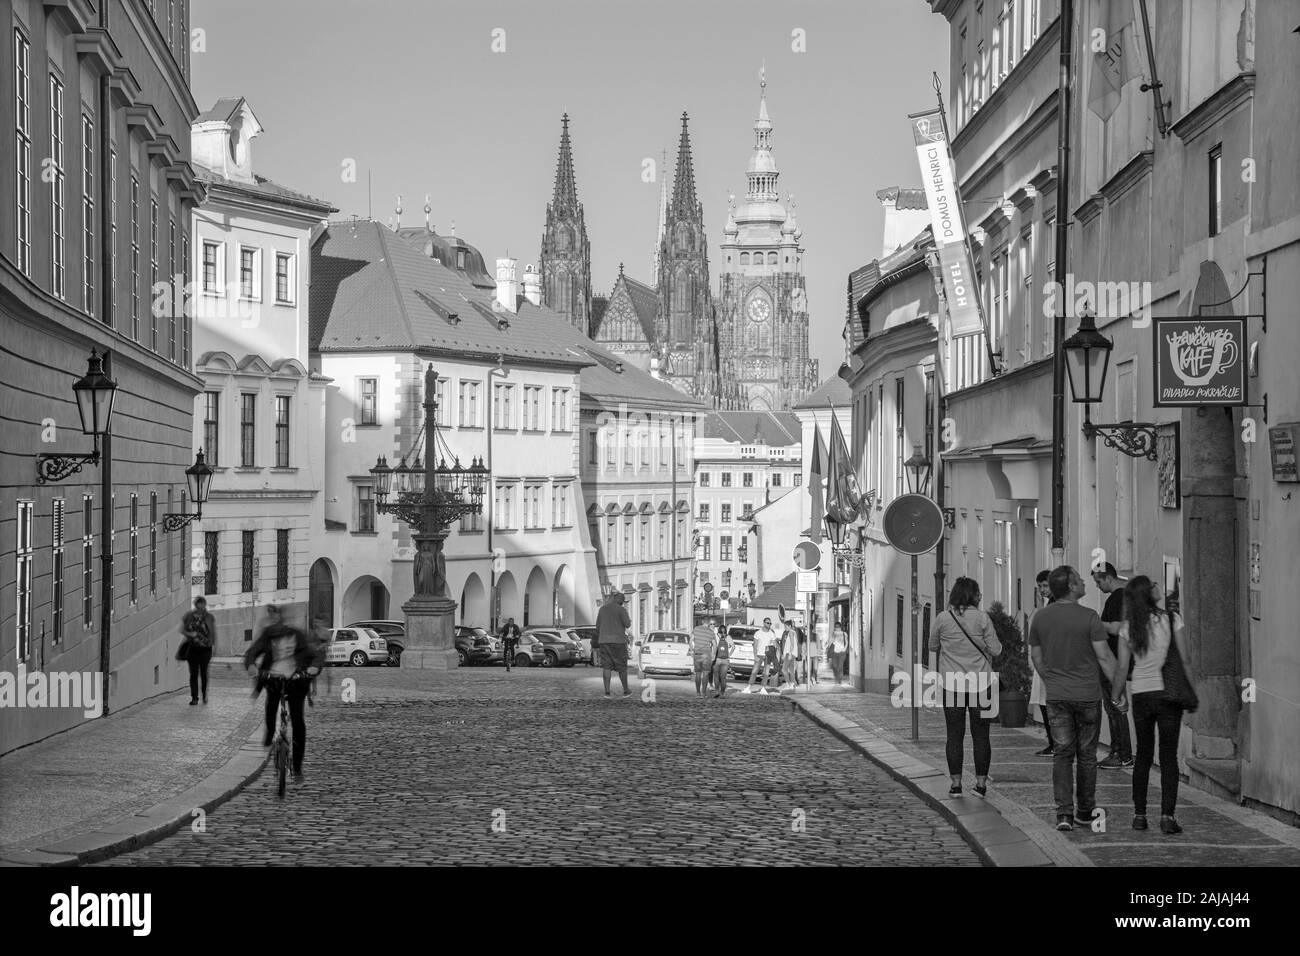 PRAGUE, CZECH REPUBLIC - OCTOBER 12, 2018: The St. Vitus cathedral and the Loretánská street in evening. Stock Photo